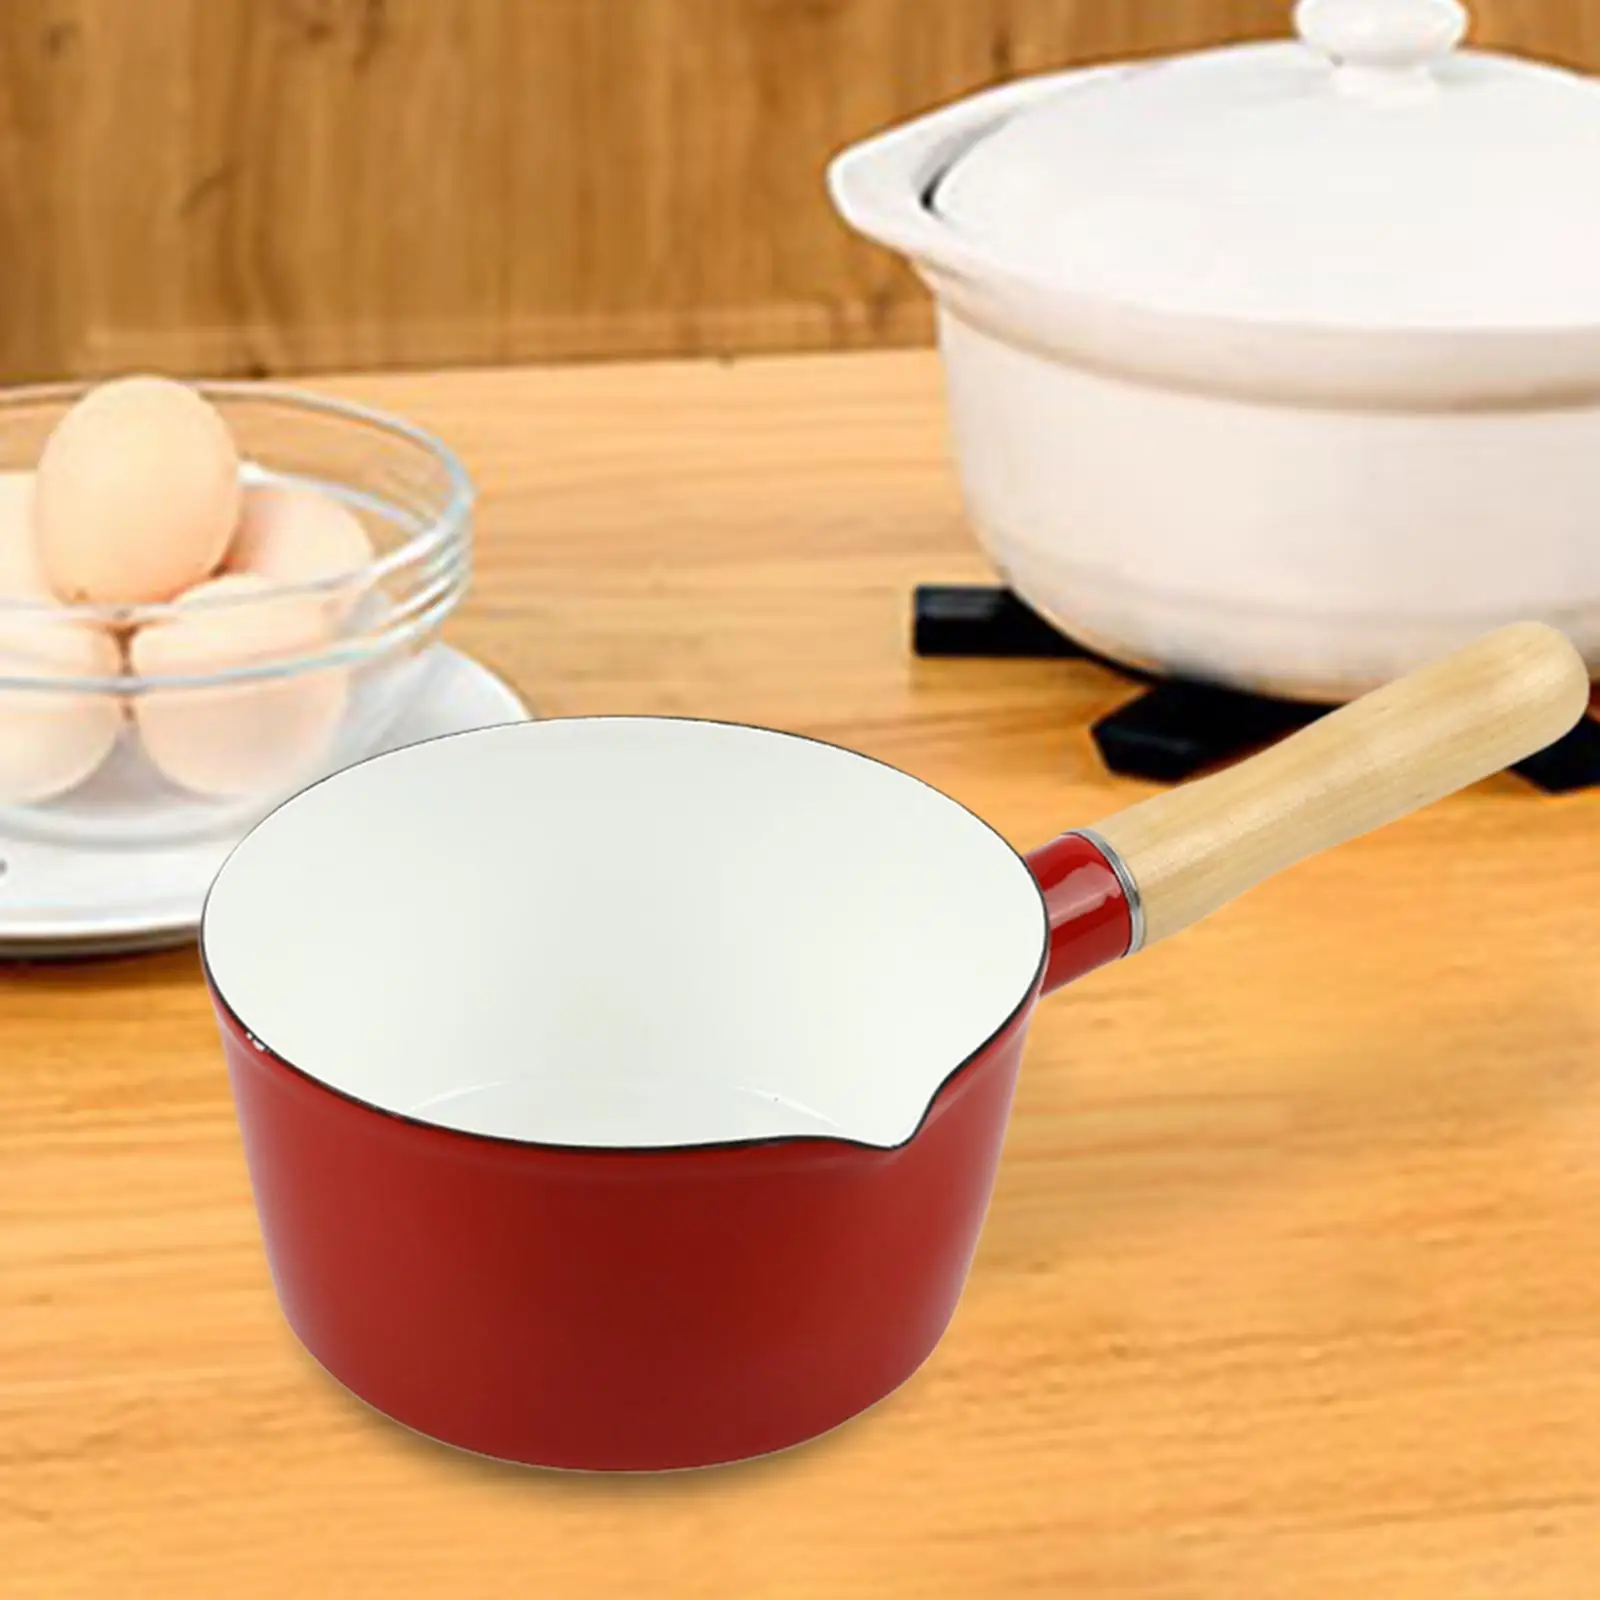 Small Milk Pan Butter Warmer Milk Container Heating Milk Small Cookware Saucepan Pan for Cafe Picnic Hotel Teahouse Bar